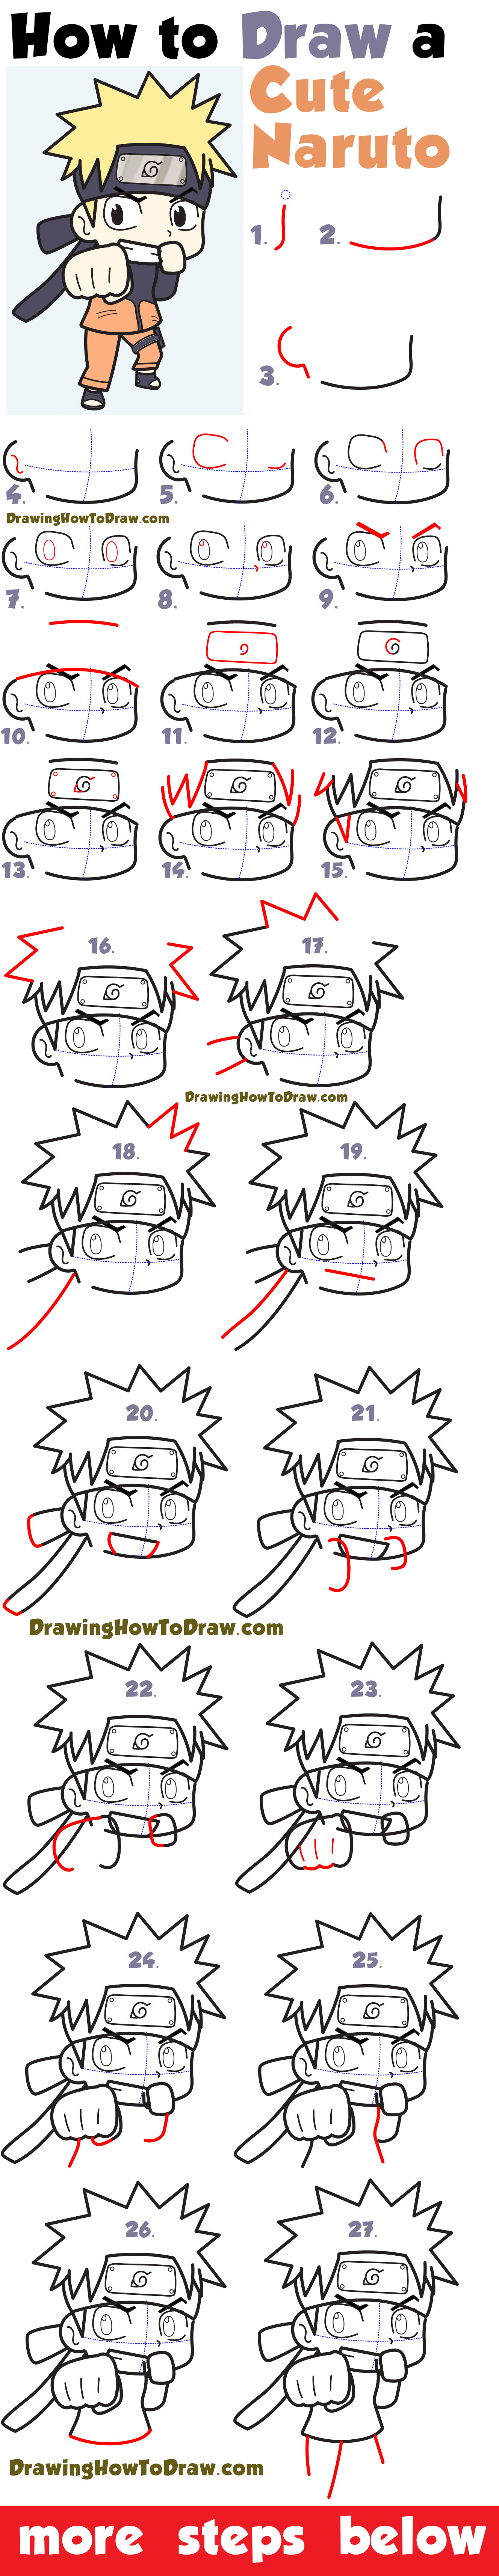 How to Draw Naruto Step by Step - How to Draw Easy